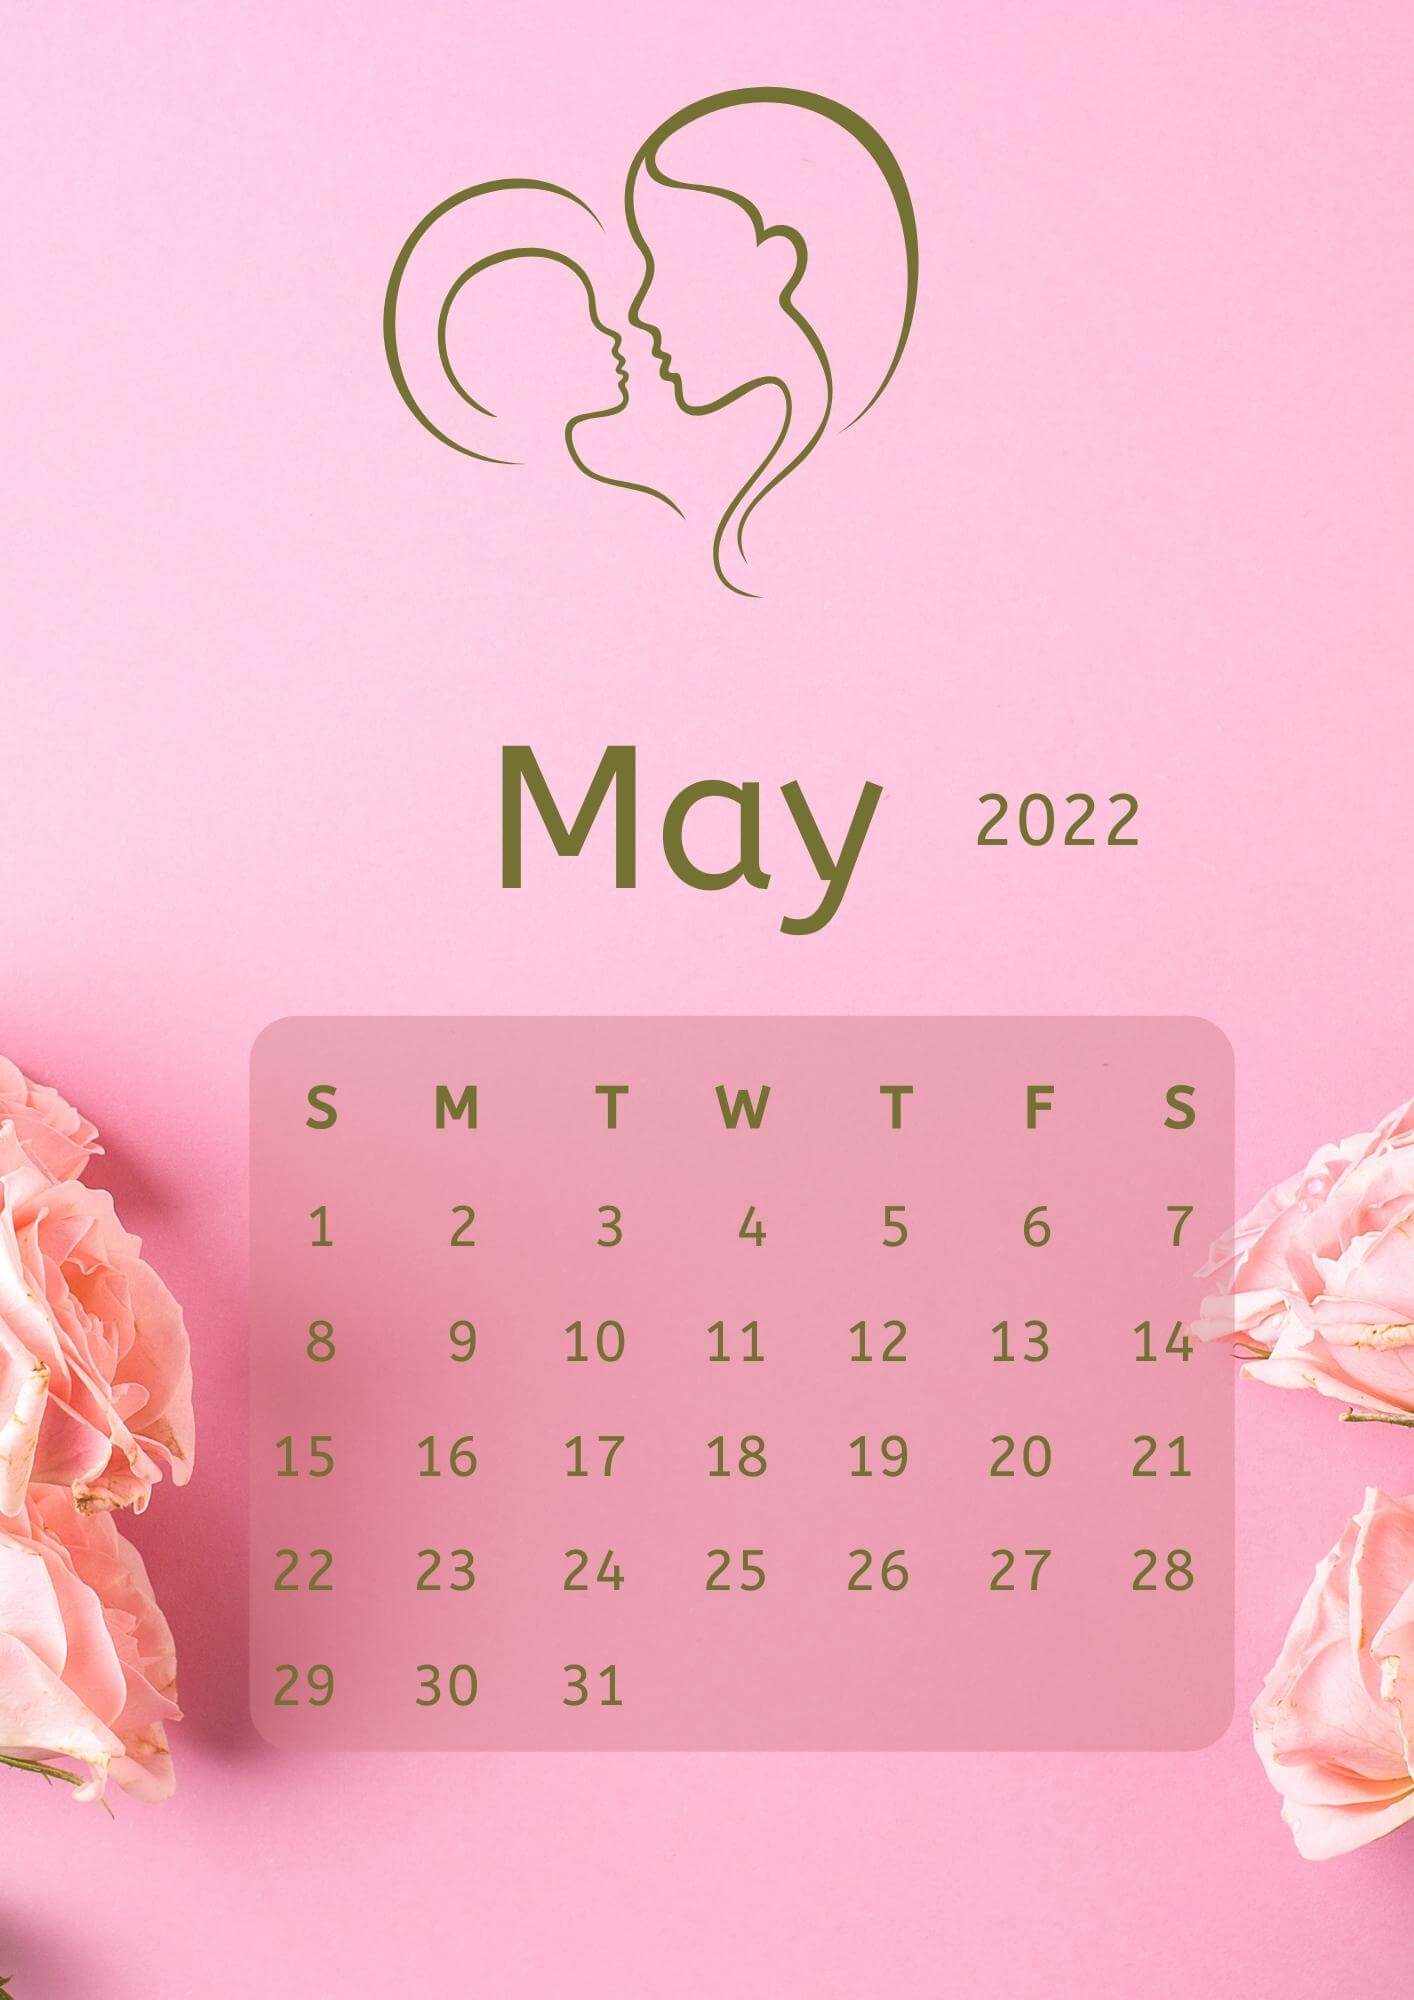 May 2022 Calendar in Mother’s Day Theme